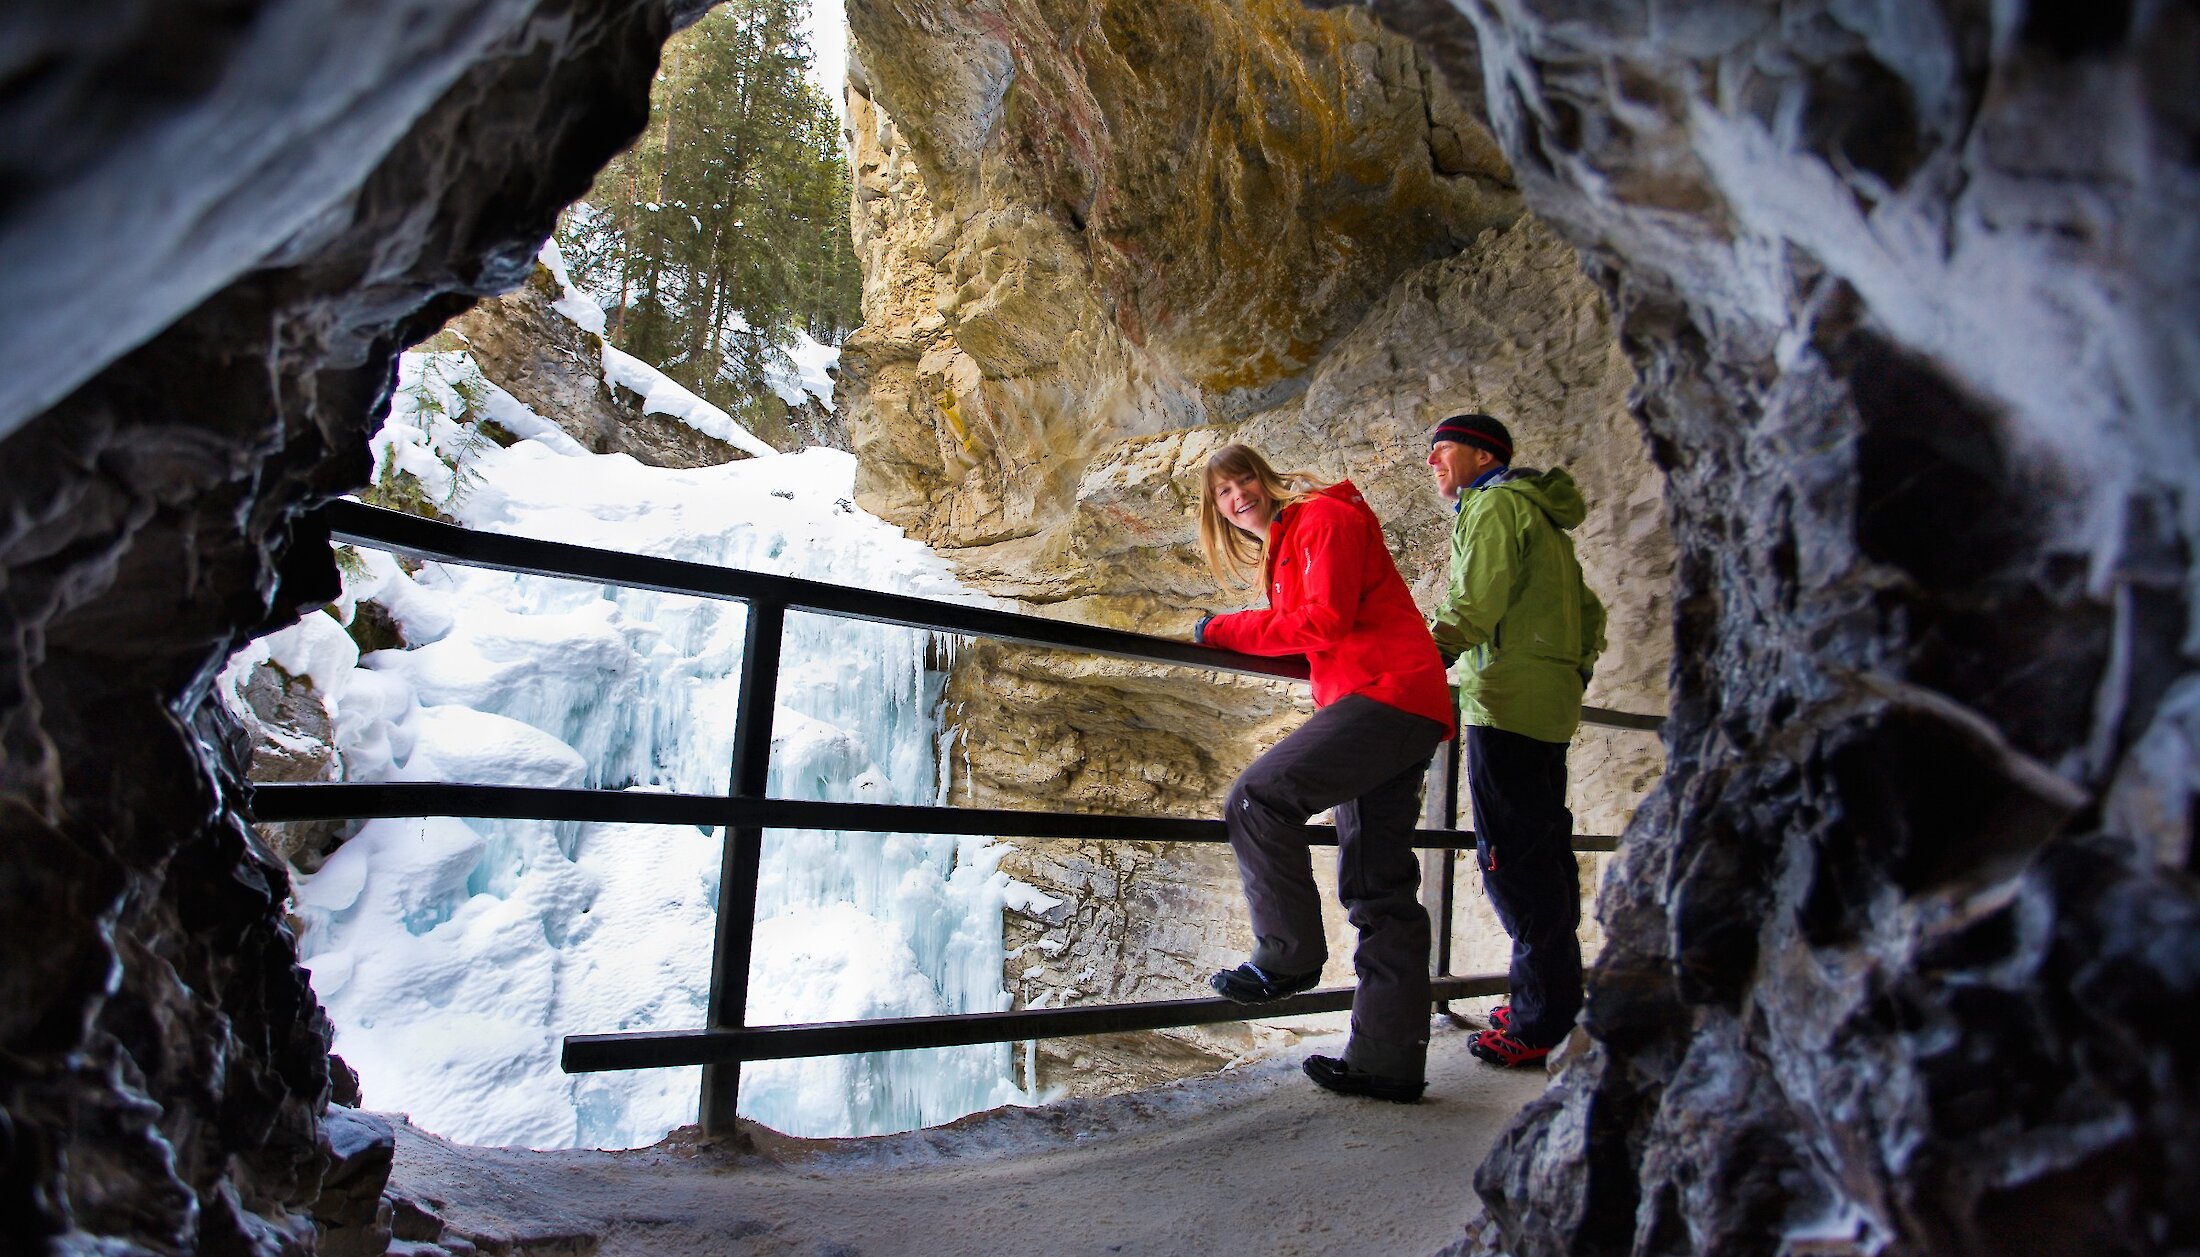 Checking out the lower falls at Johnston Canyon